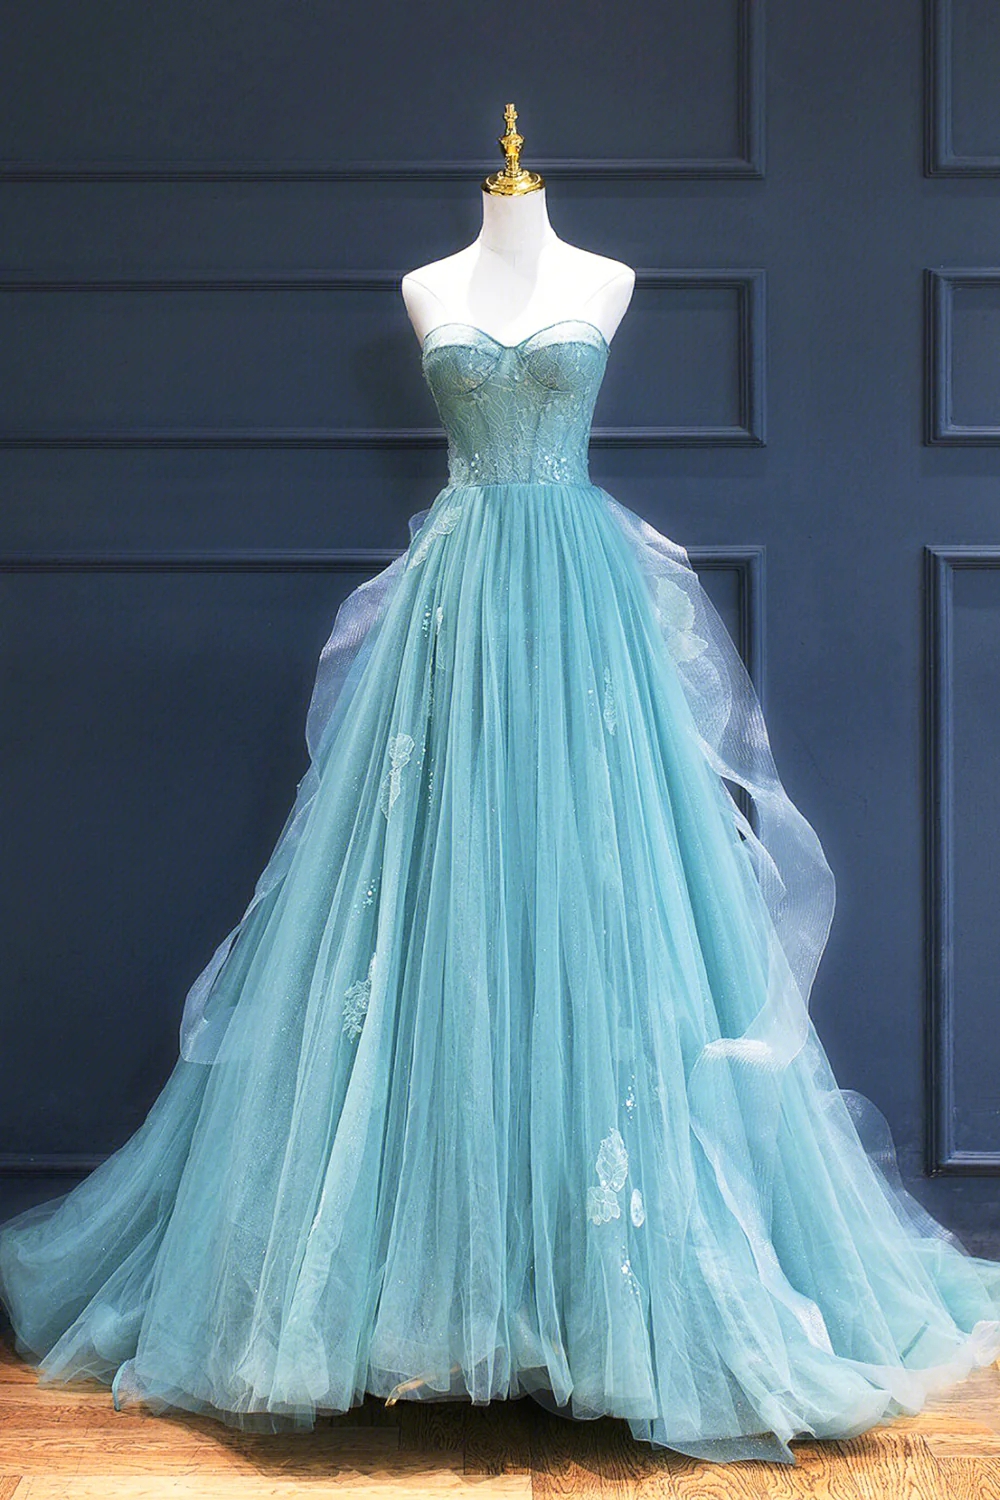 Enchanted Ocean A-line Prom Dress With Lace Floral Embellishments